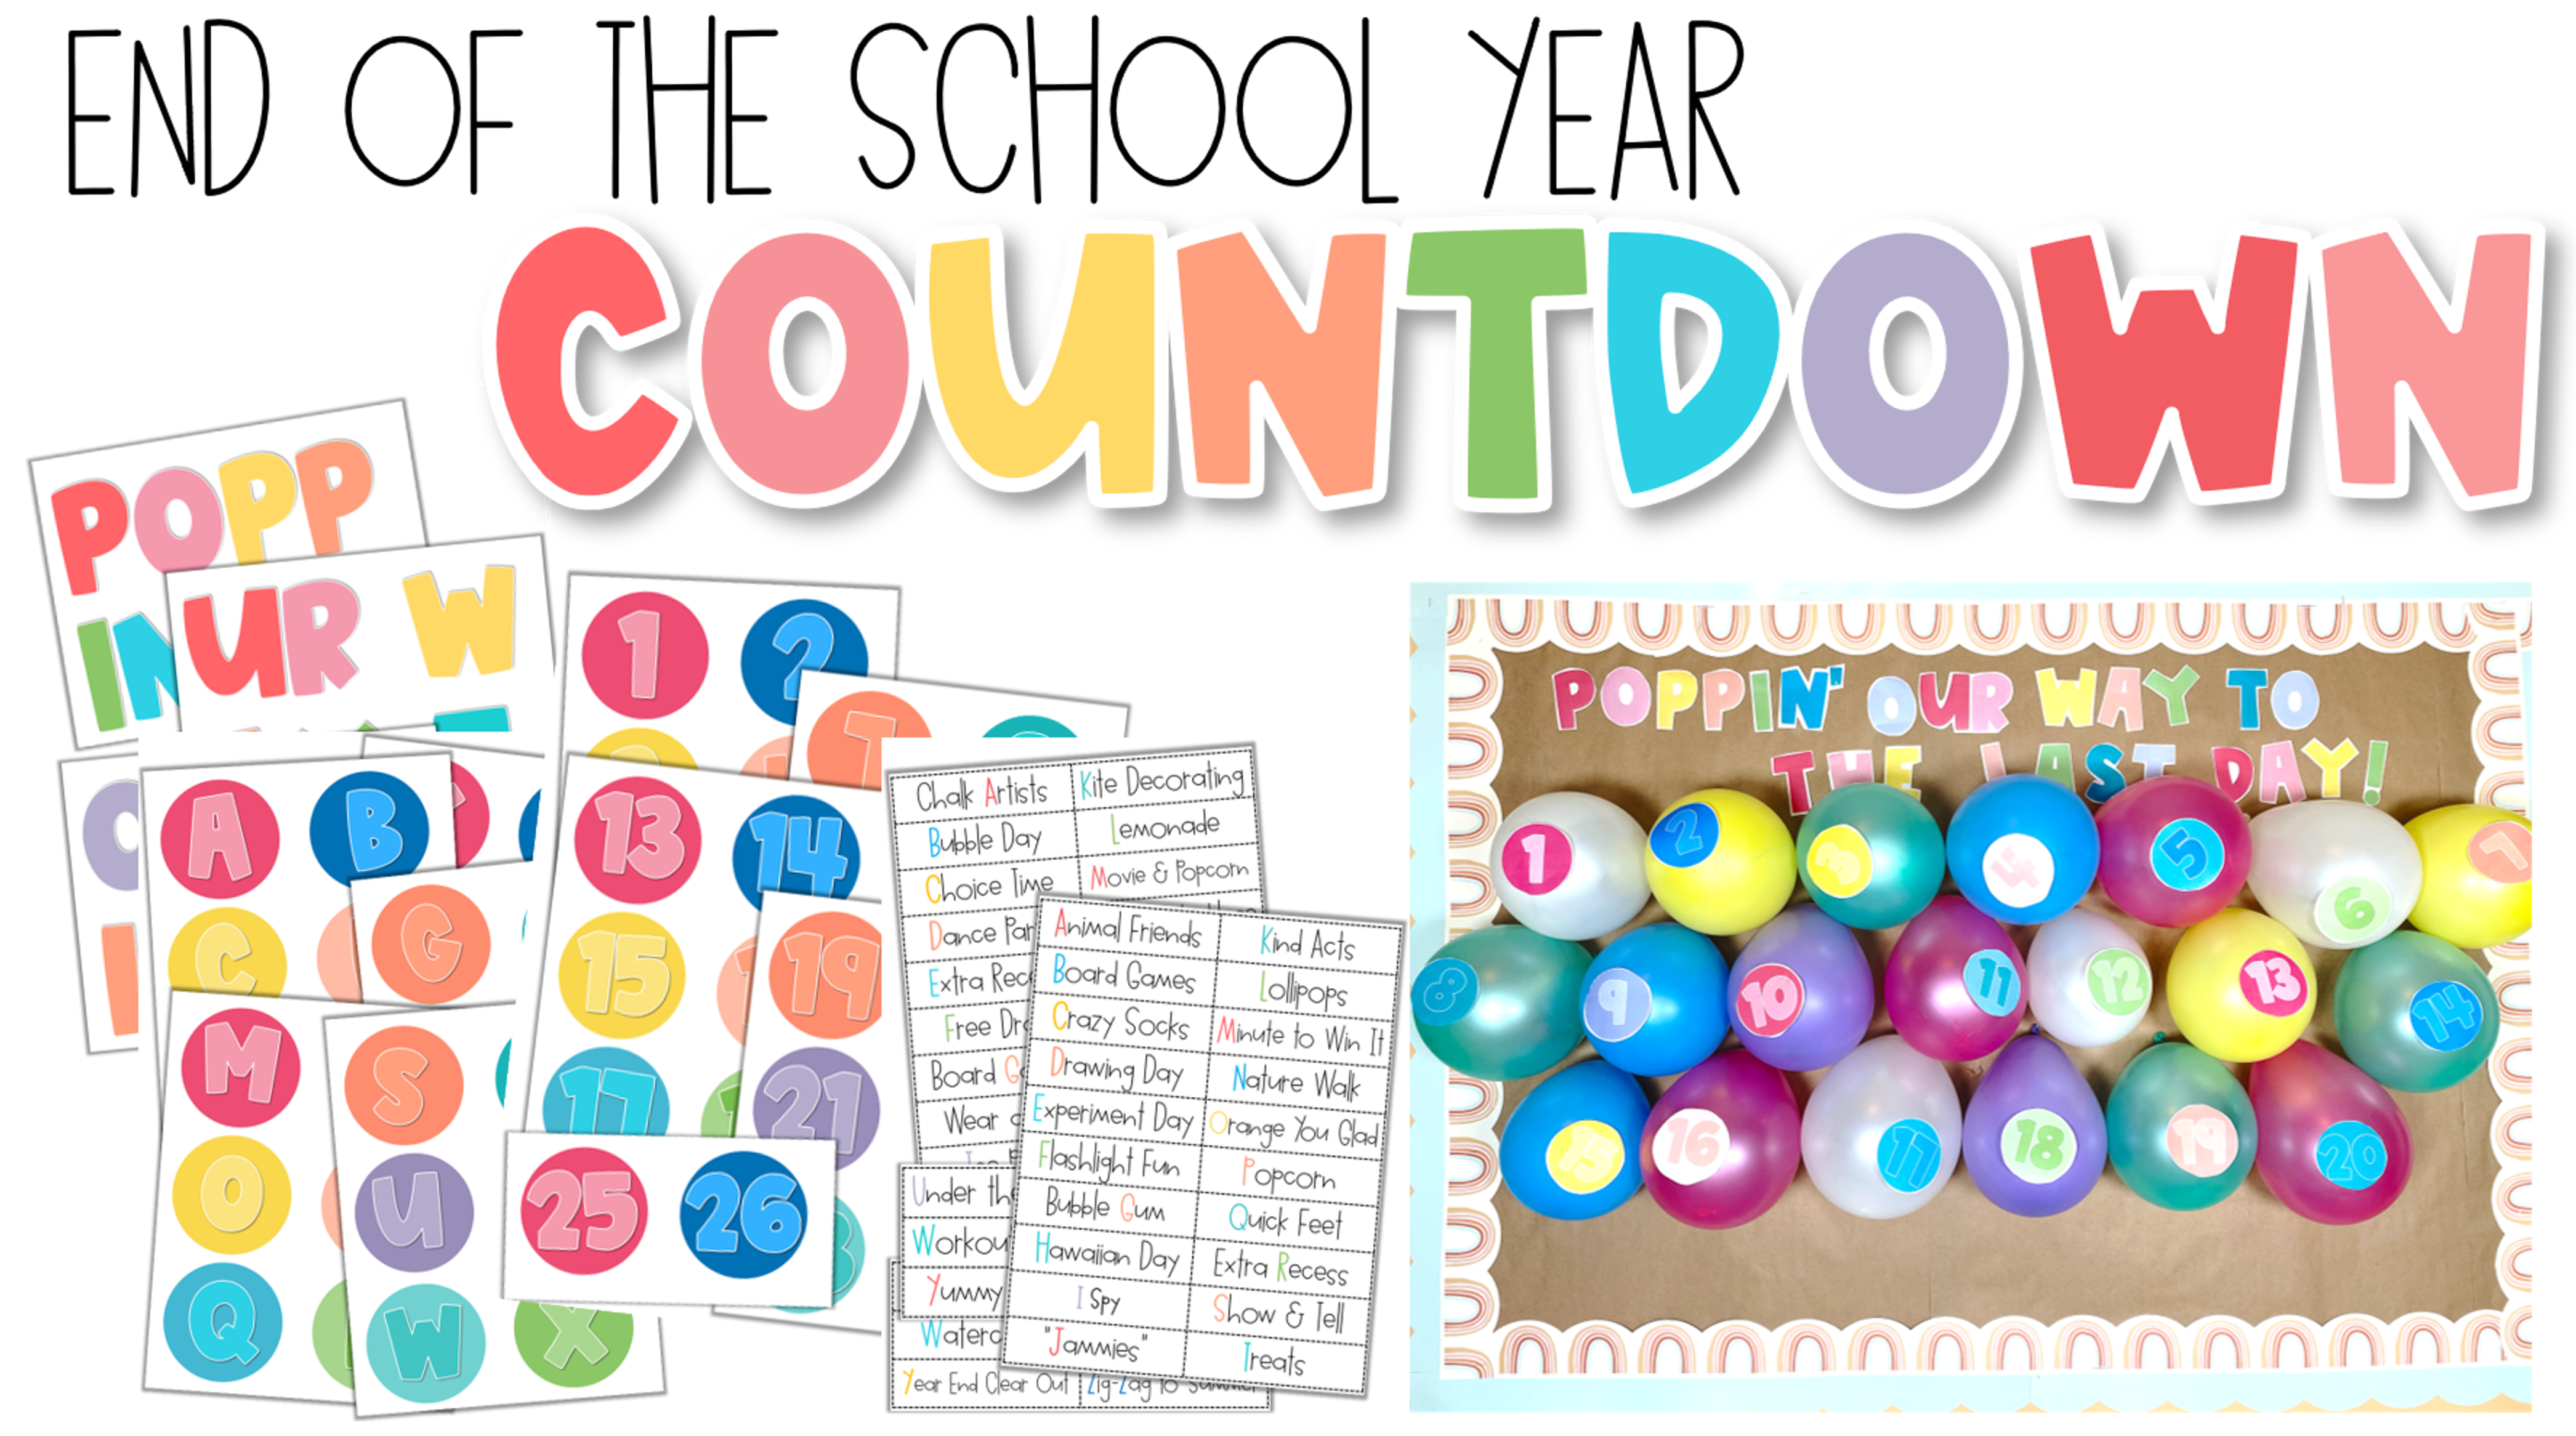 End of the School Year Countdown